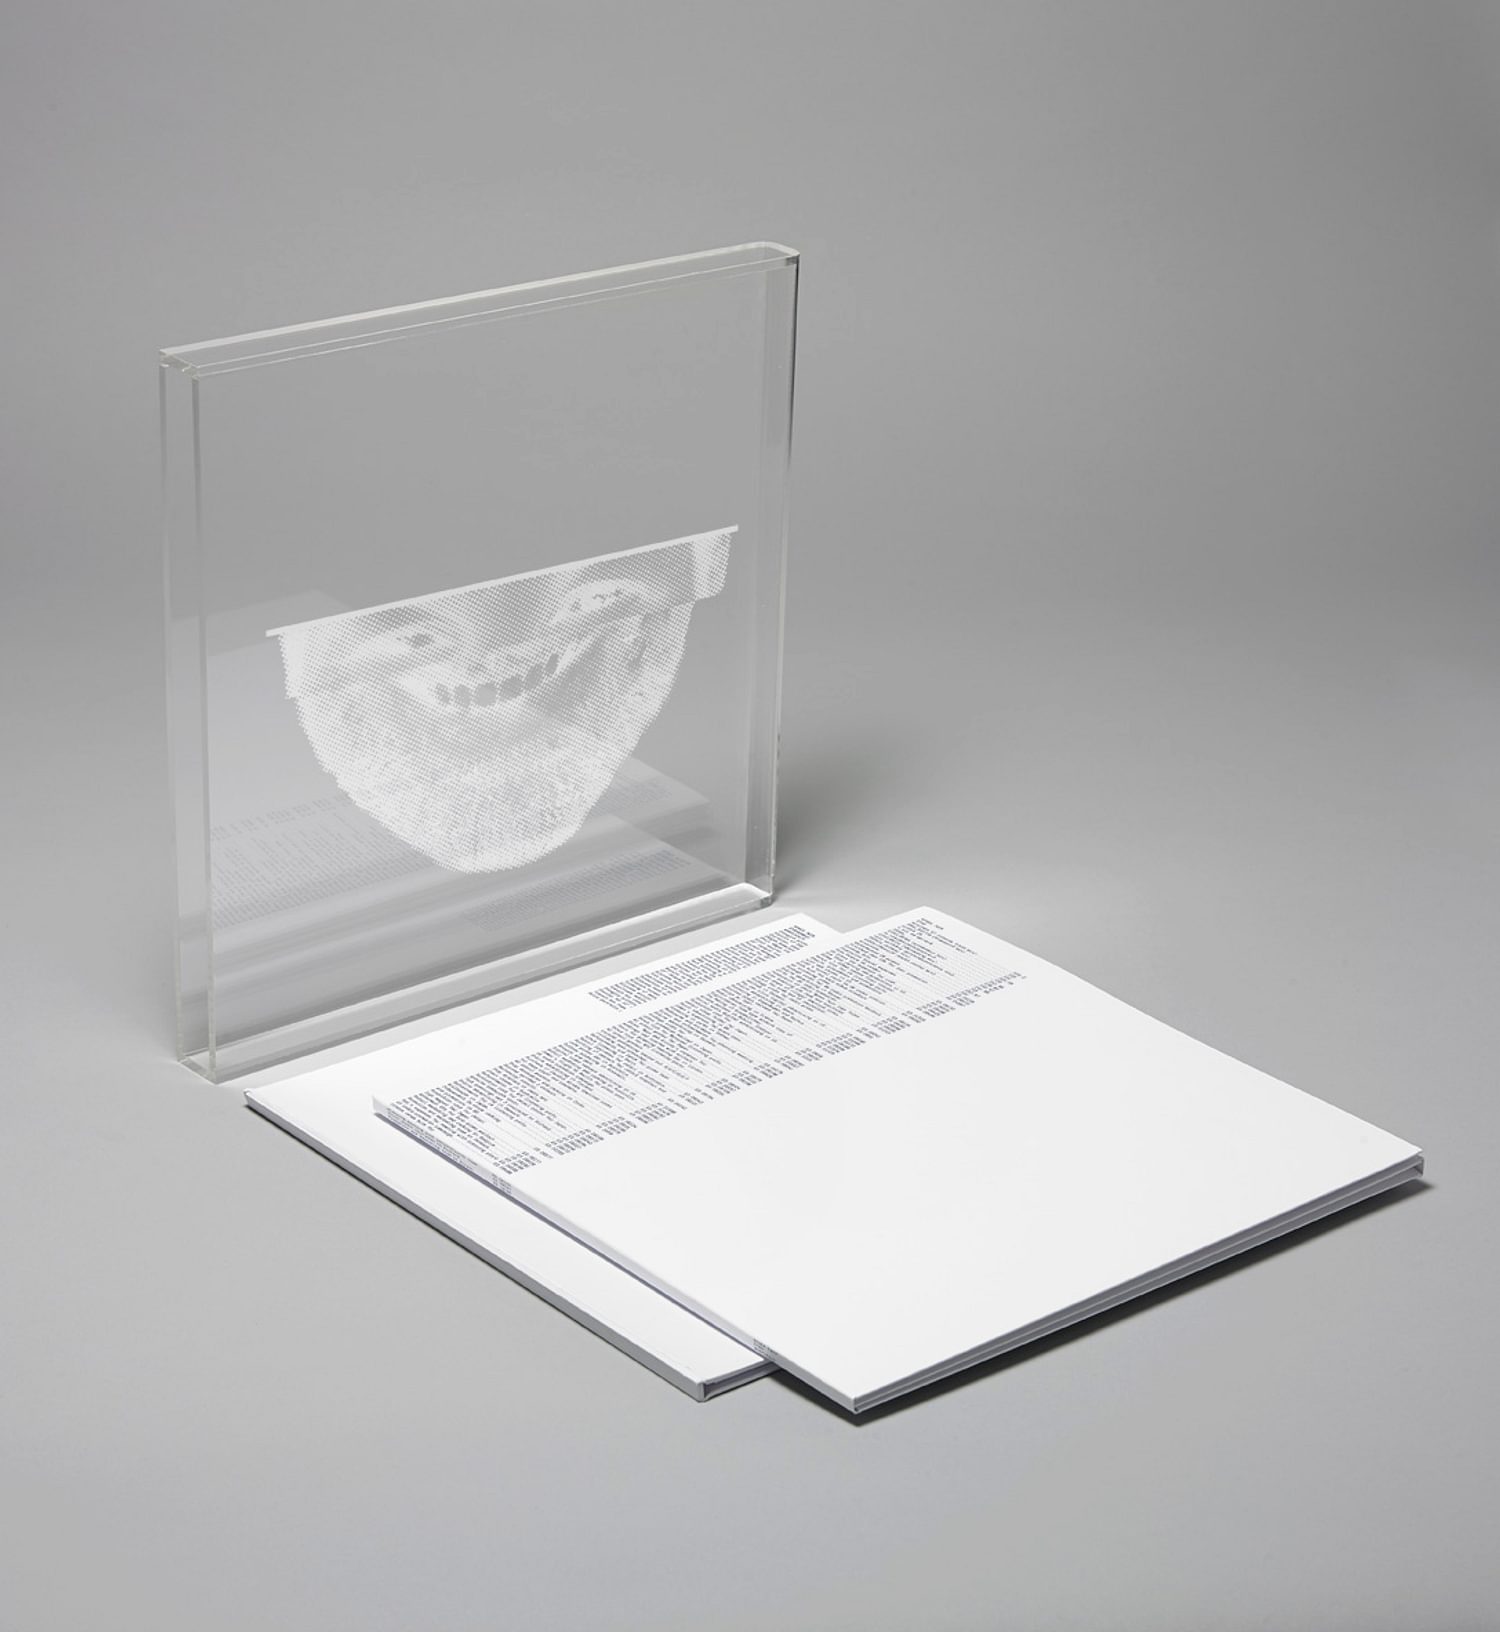 Aphex Twin’s ‘Syro’ packaging unveiled by Warp Records